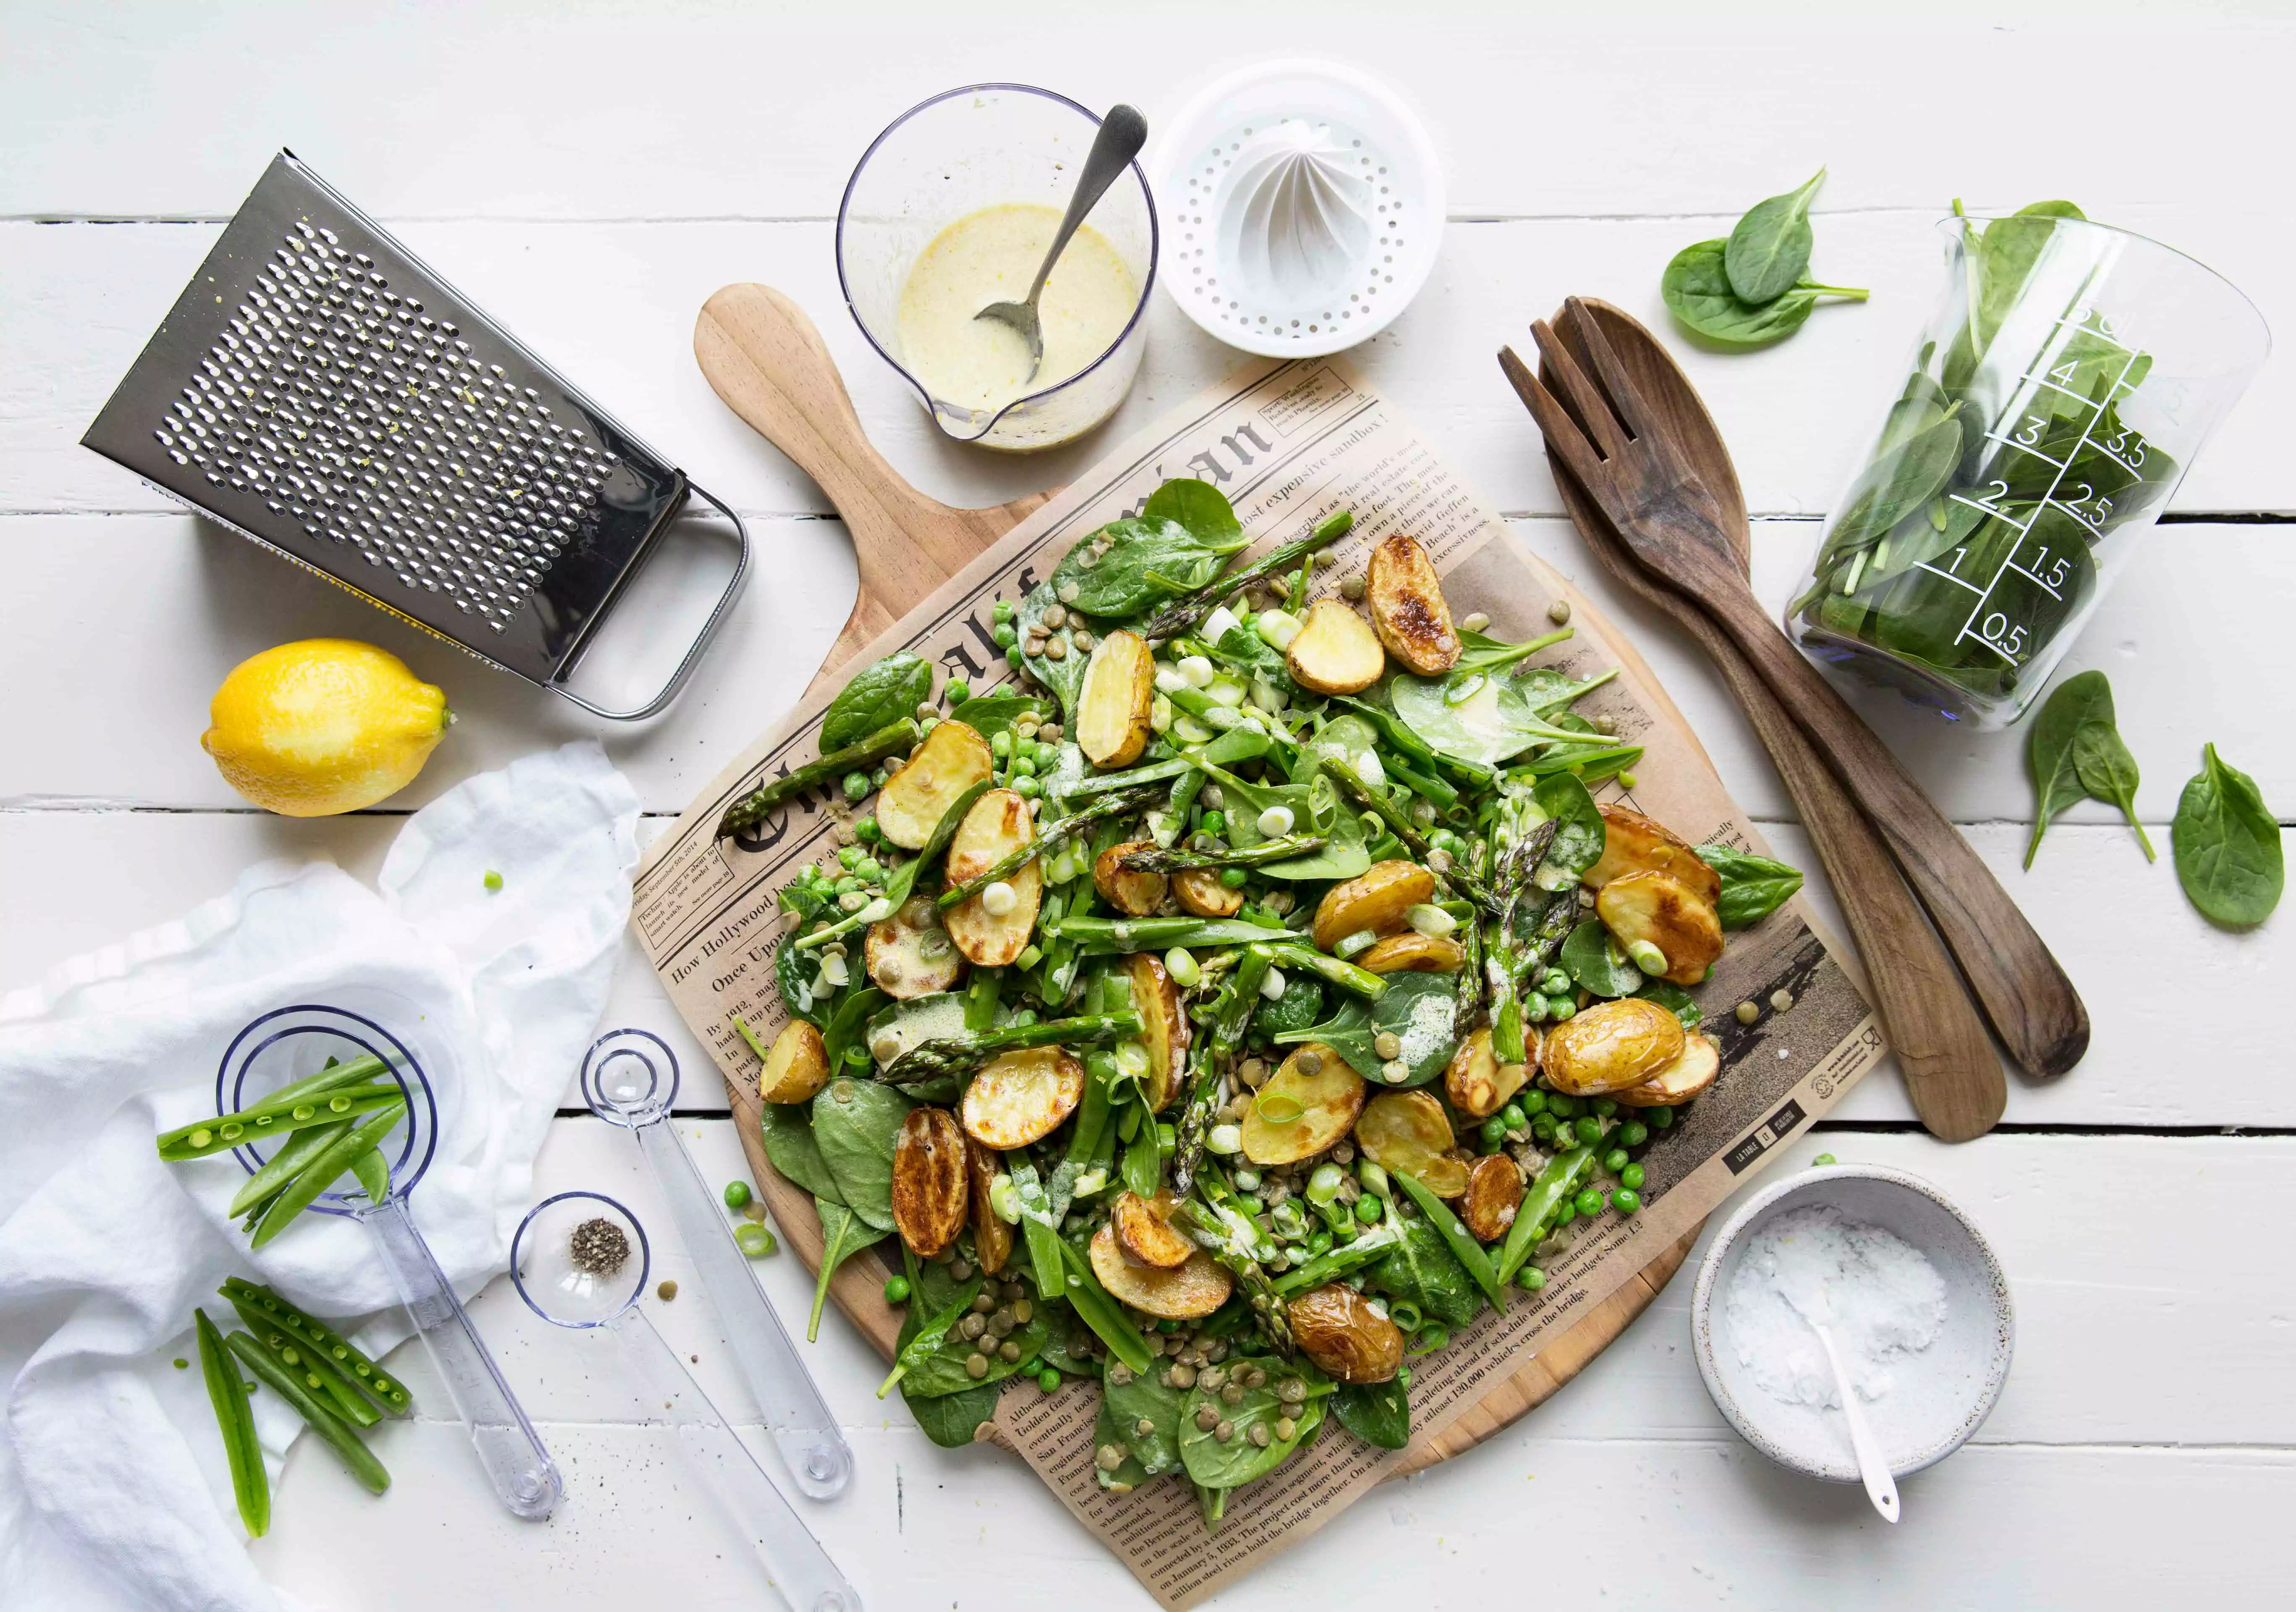 Summer salad with roasted potatoes and dijon dressing